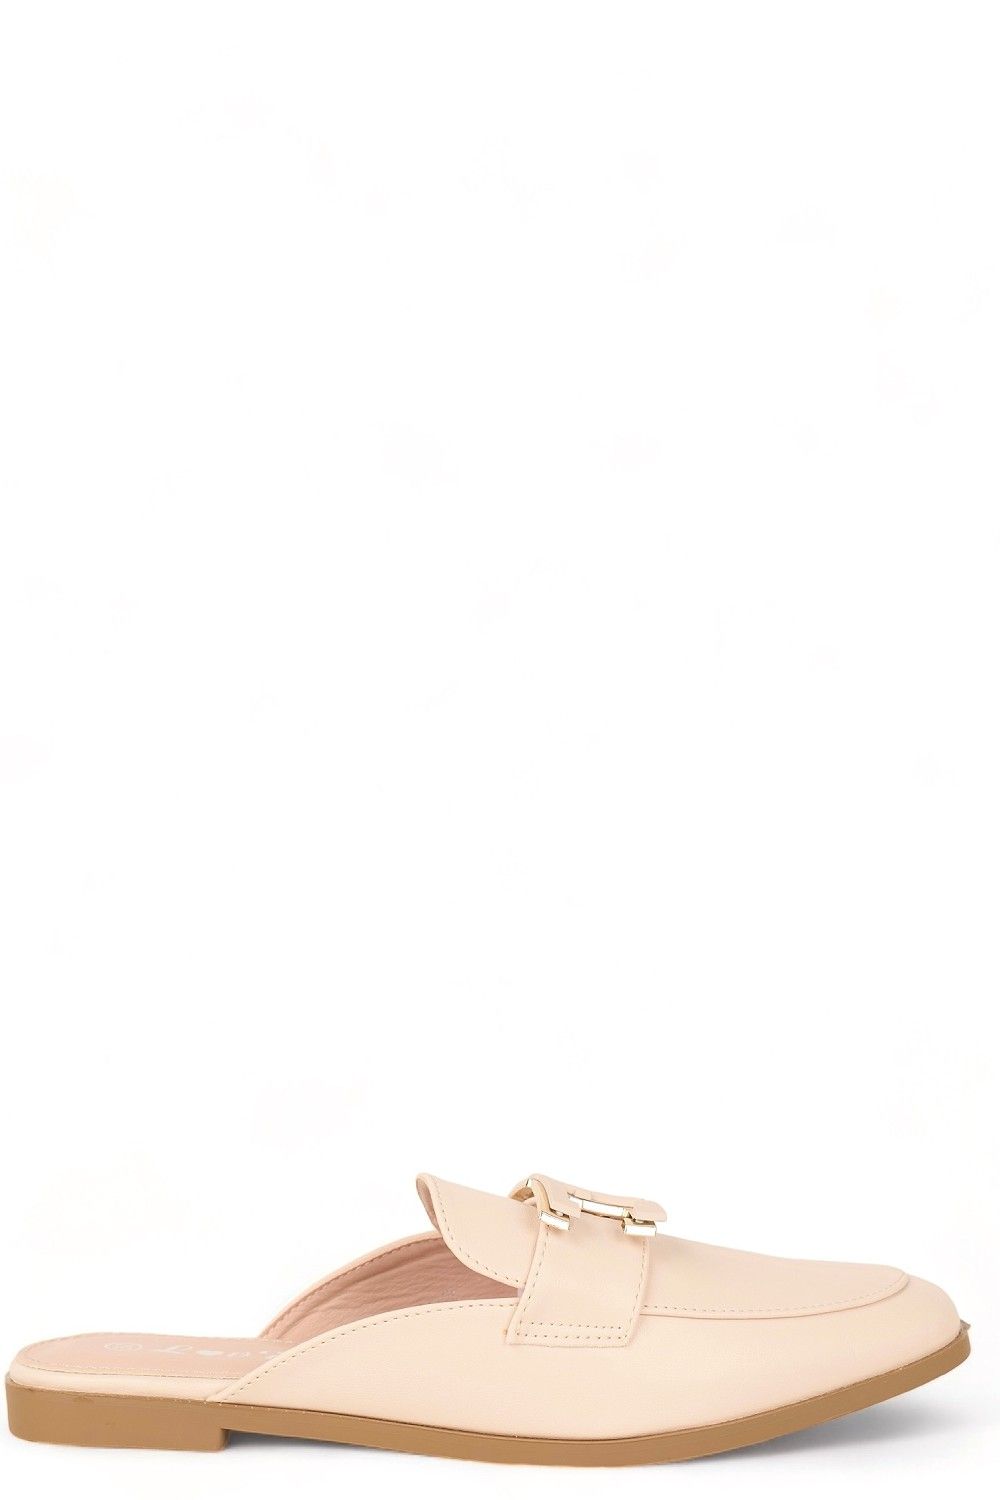 NUDE FLAT MULES ΜΕ ΑΓΚΡΑΦΑ